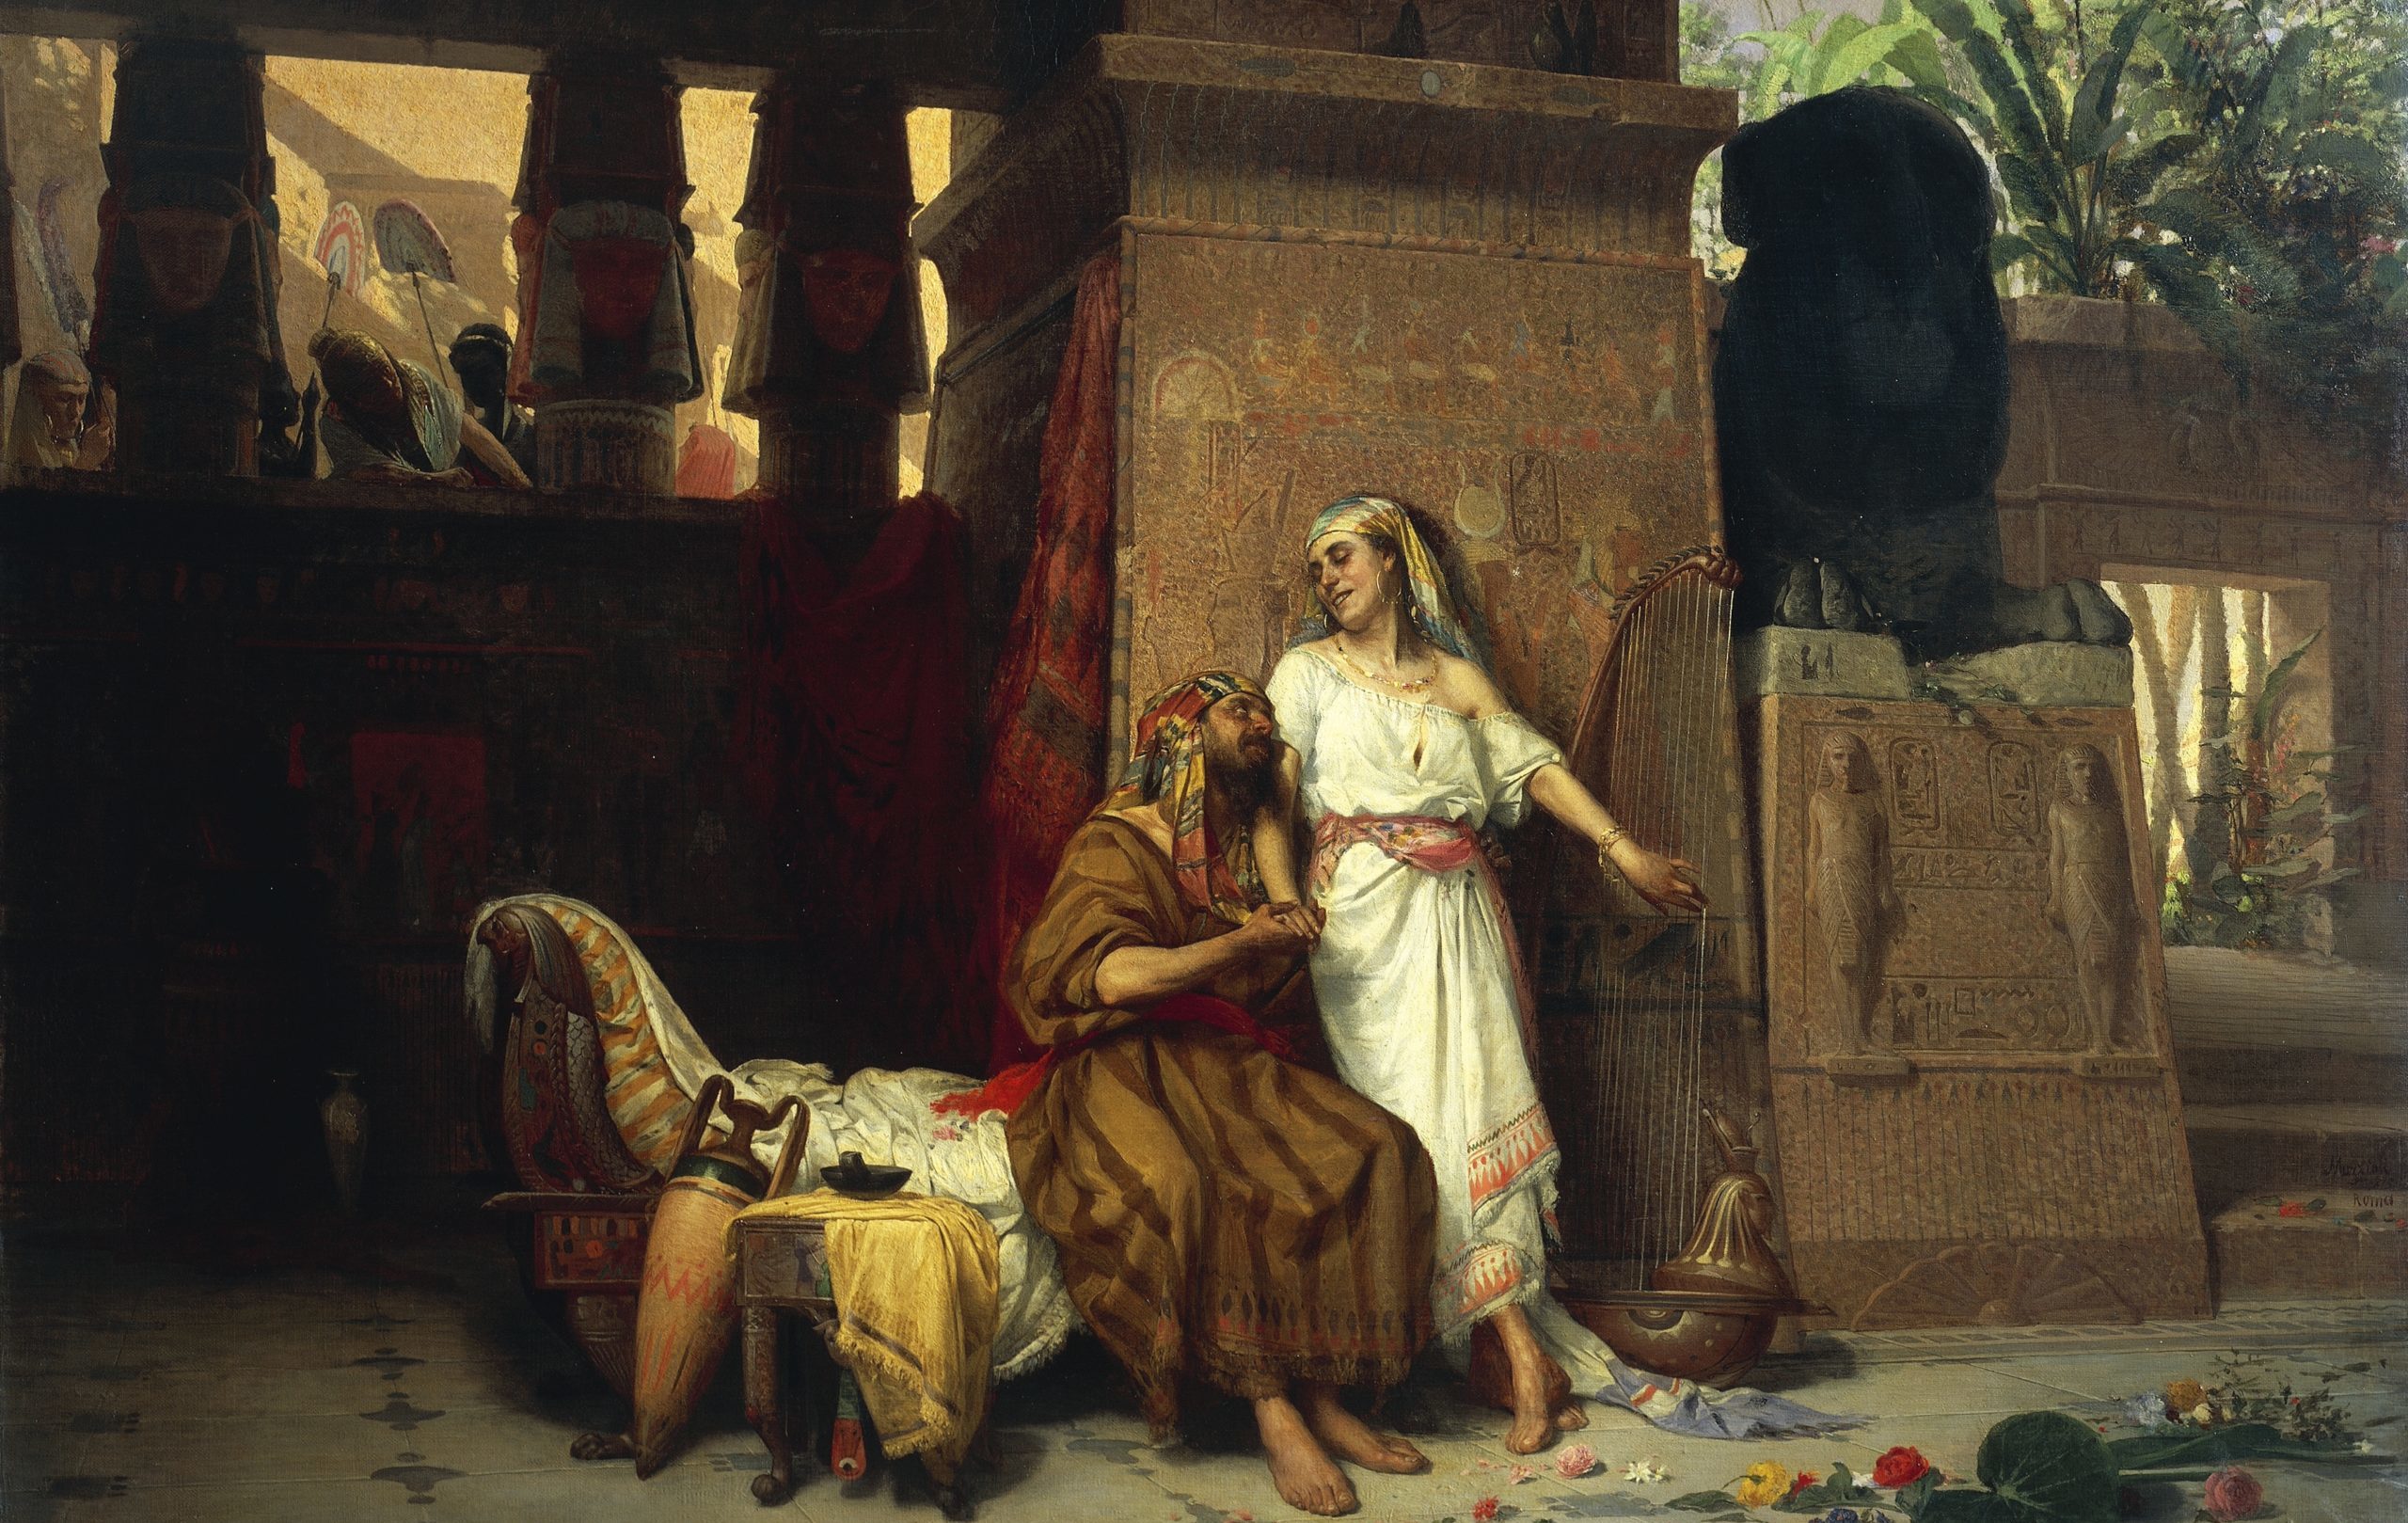 Abraham and Sarah at the court of the Pharaohs, 1875, by Giovanni Muzzioli (1854-1894). (Photo by DeAgostini/Getty Images)